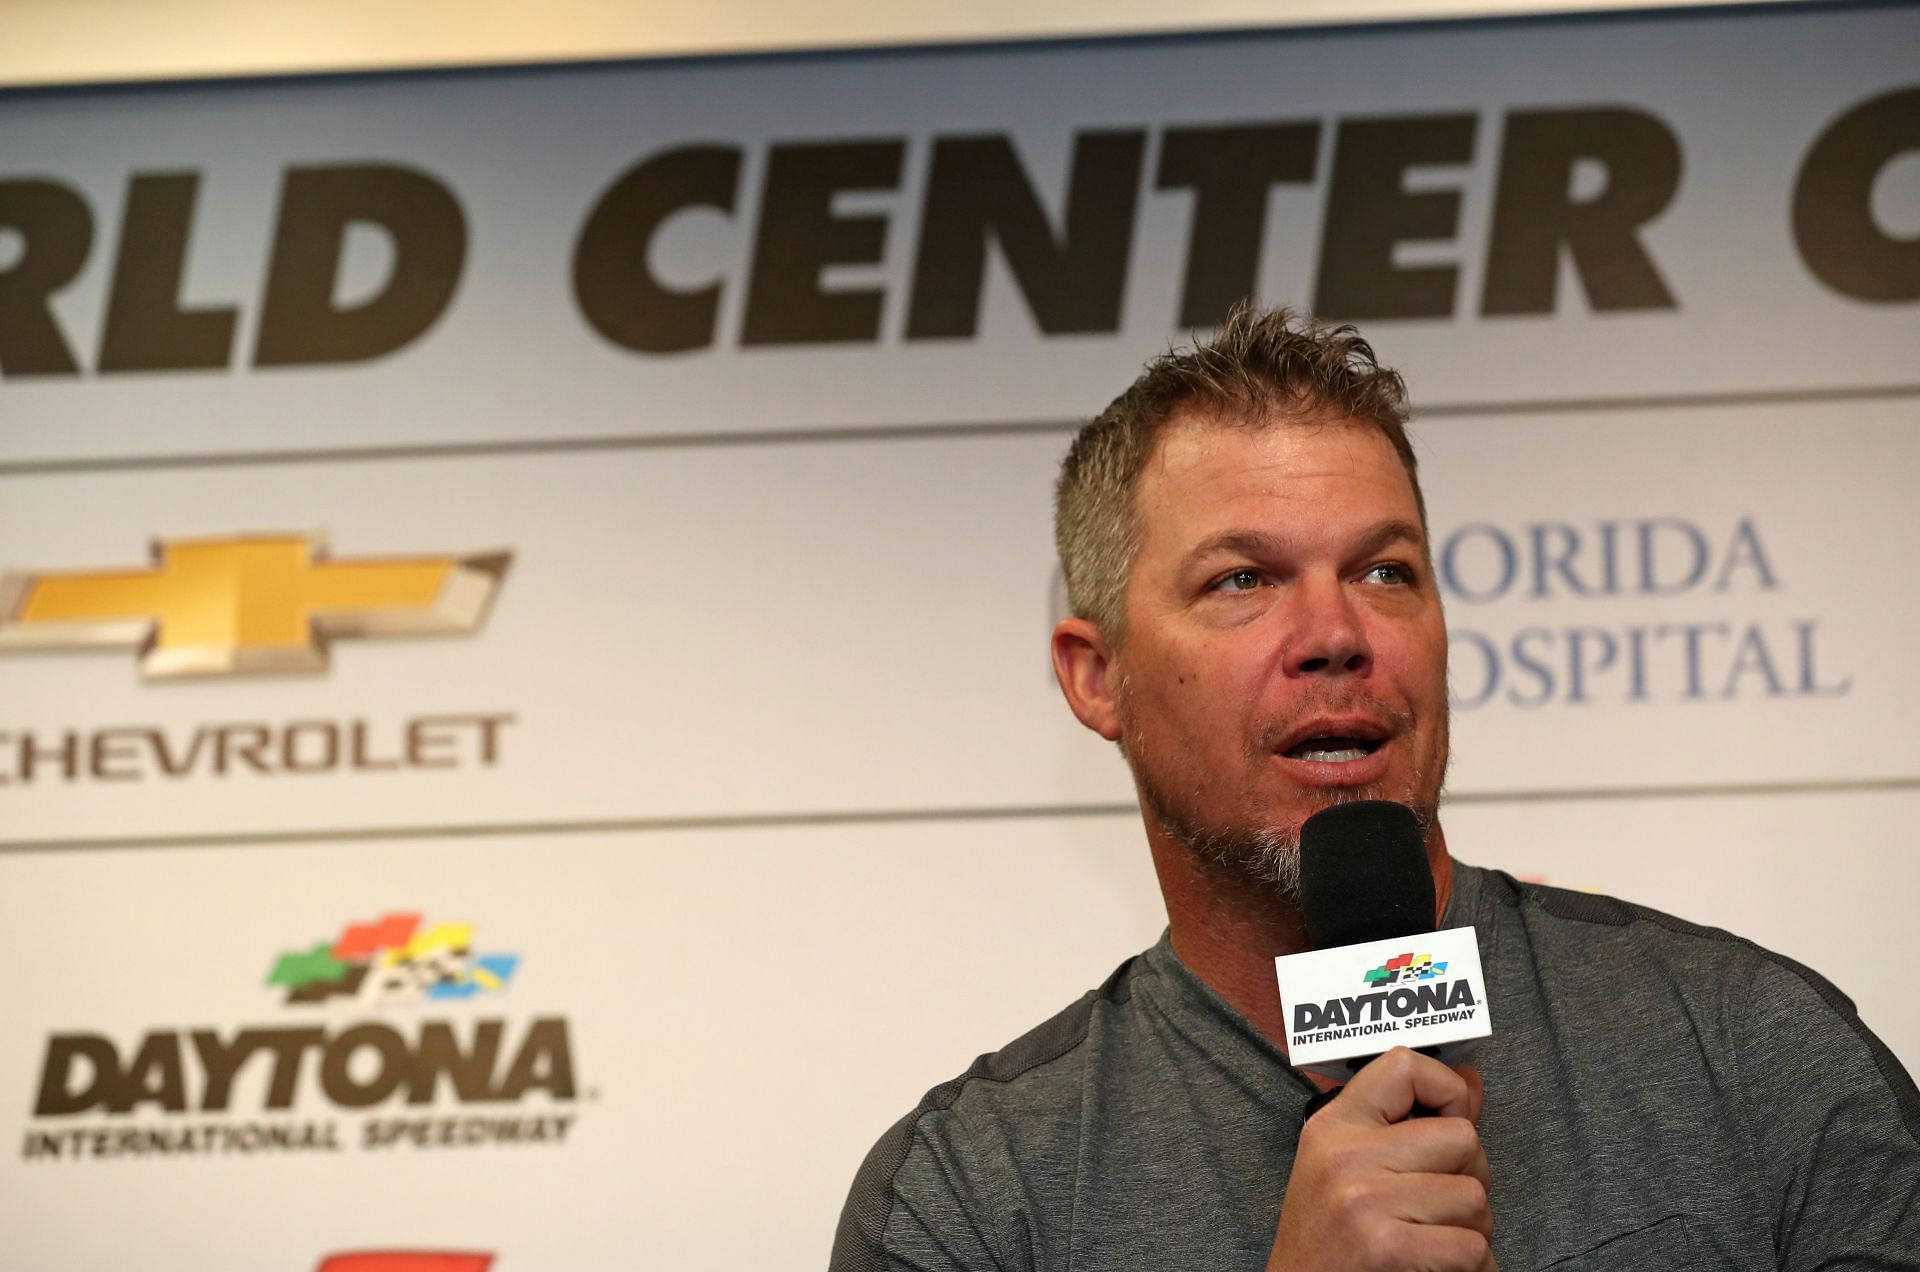 Atlanta Braves: Braves great Chipper Jones once spoke hopefully about his  relationship with his third wife, after two failed marriages